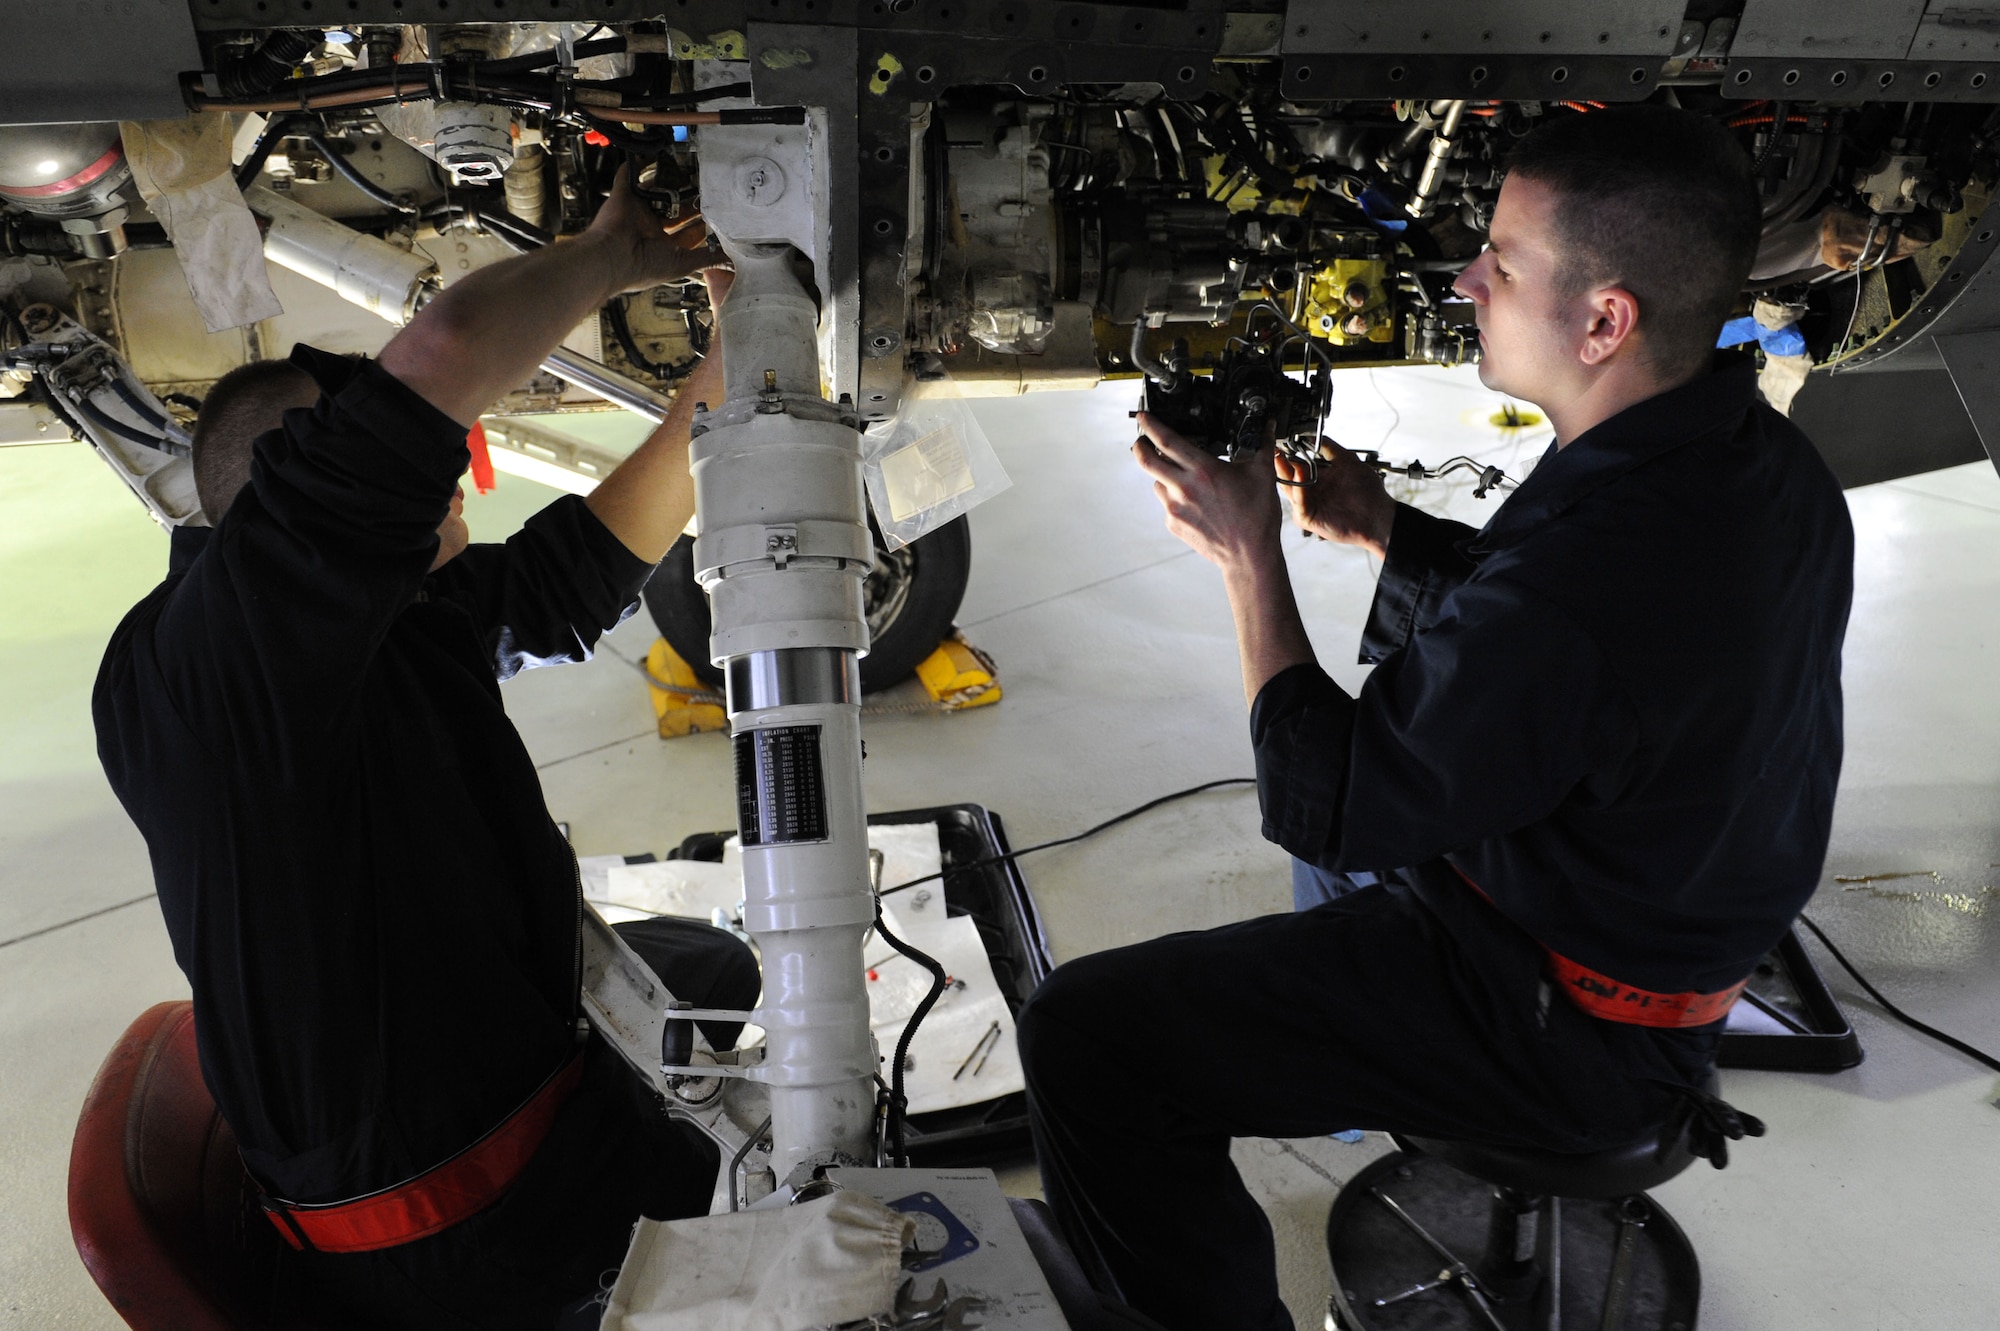 SPANGDAHLEM AIR BASE, Germany – Senior Airman Michael Wylie and Staff Sgt. Michael Klucar, 52nd Aircraft Maintenance Squadron tactical aircraft maintainers, install a jet-fuel starter fuel control assembly during maintenance on an F-16 Fighting Falcon in Hangar 2 here Jan. 23. Airmen perform maintence daily with different aircraft rotations to ensure the health of the 52nd Fighter Wing fleet. Wylie and Frederick work to provide the wing mission-capable aircraft through scheduled maintenance as part of the 480th Aircraft Maintenance Unit. (U.S. Air Force photo/Senior Airman Christopher Toon)